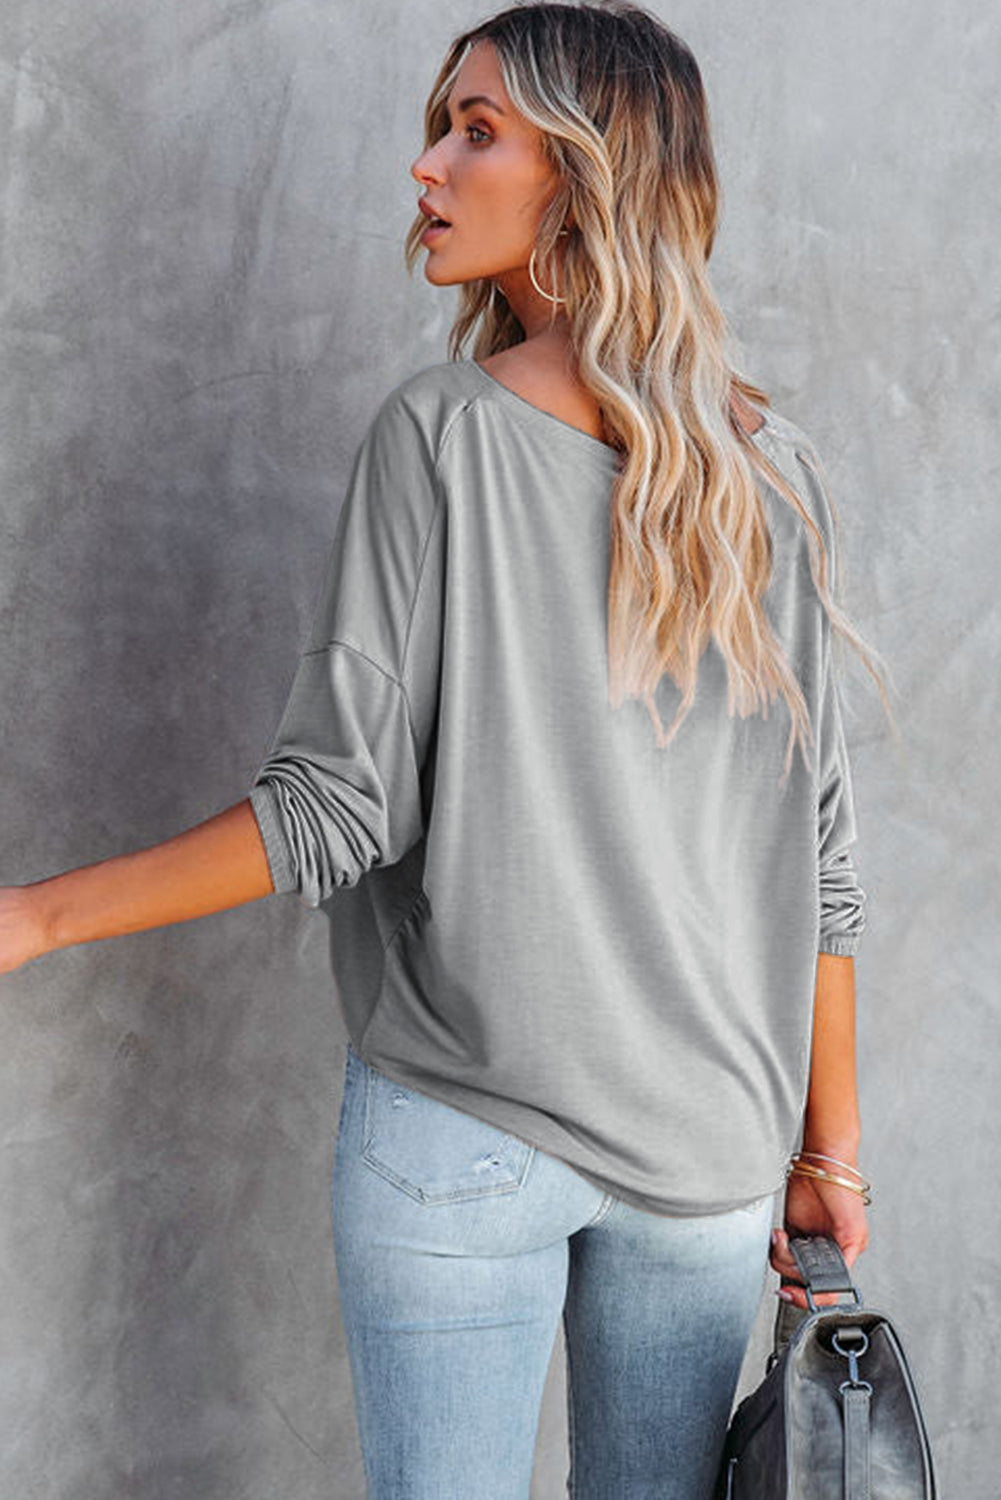 Gray Loose Fit Wide Neck Batwing Sleeves Top Long Sleeve Tops JT's Designer Fashion